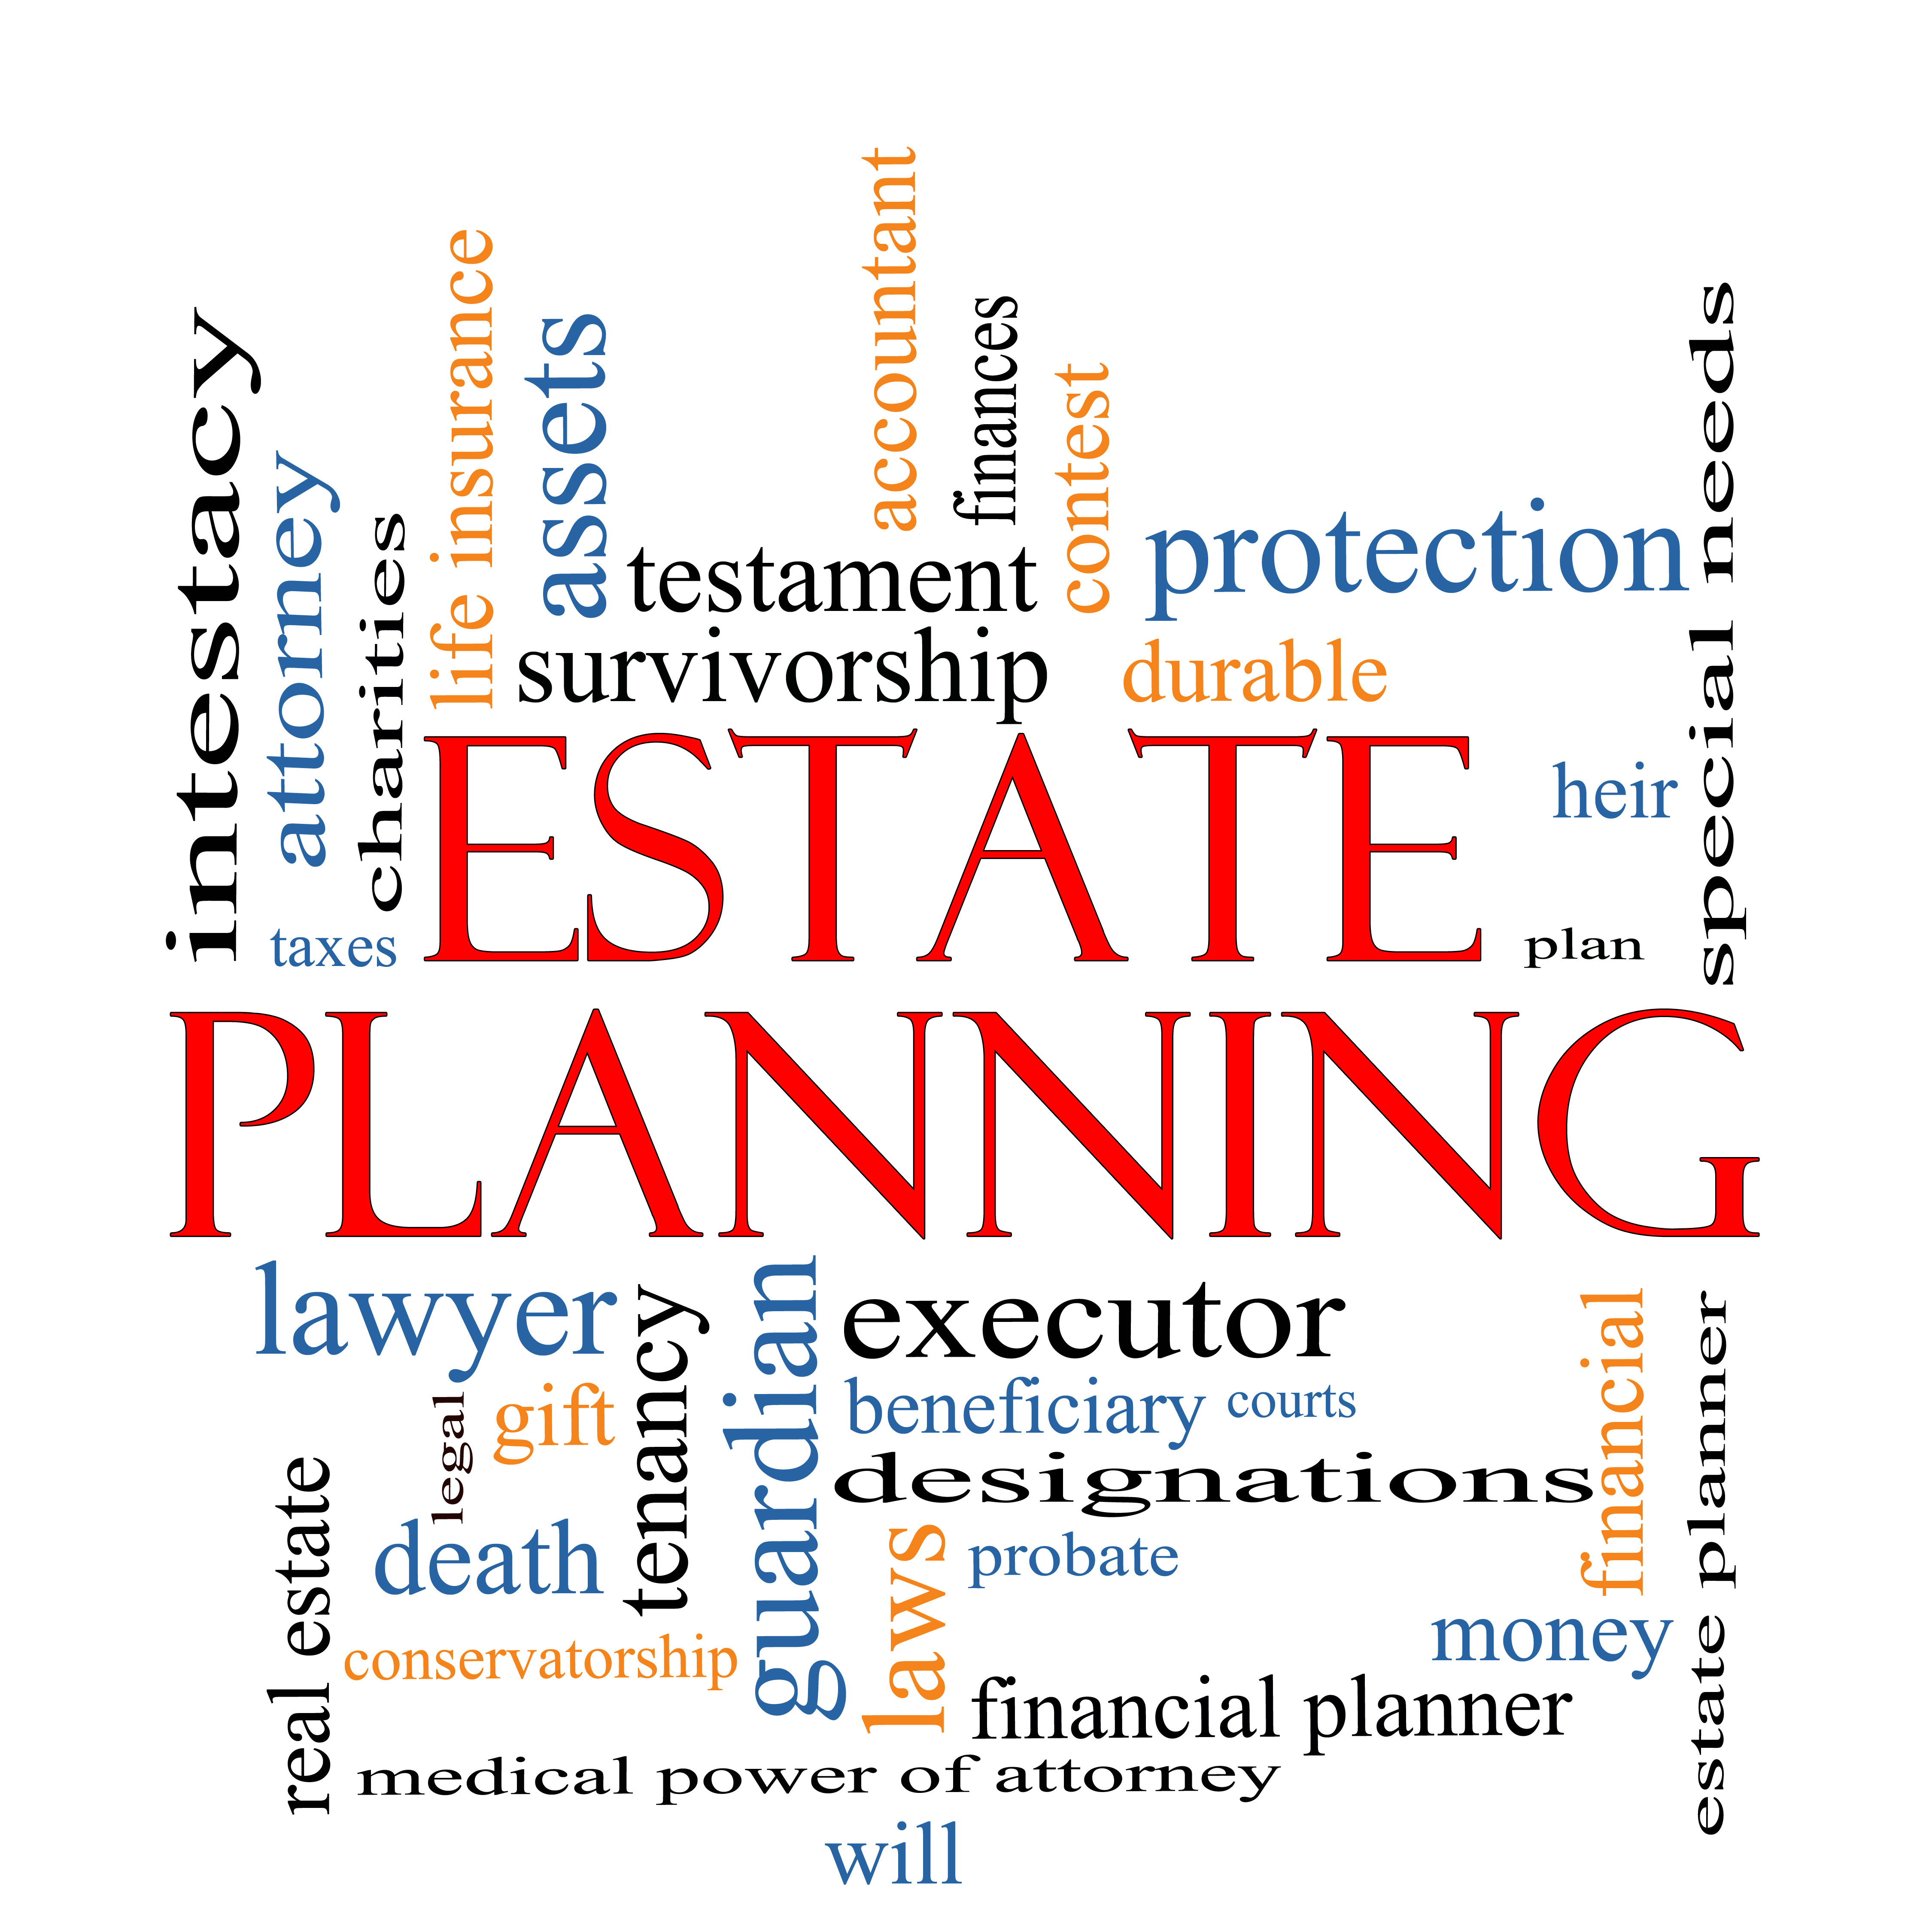 5 Estate Planning Must-Haves